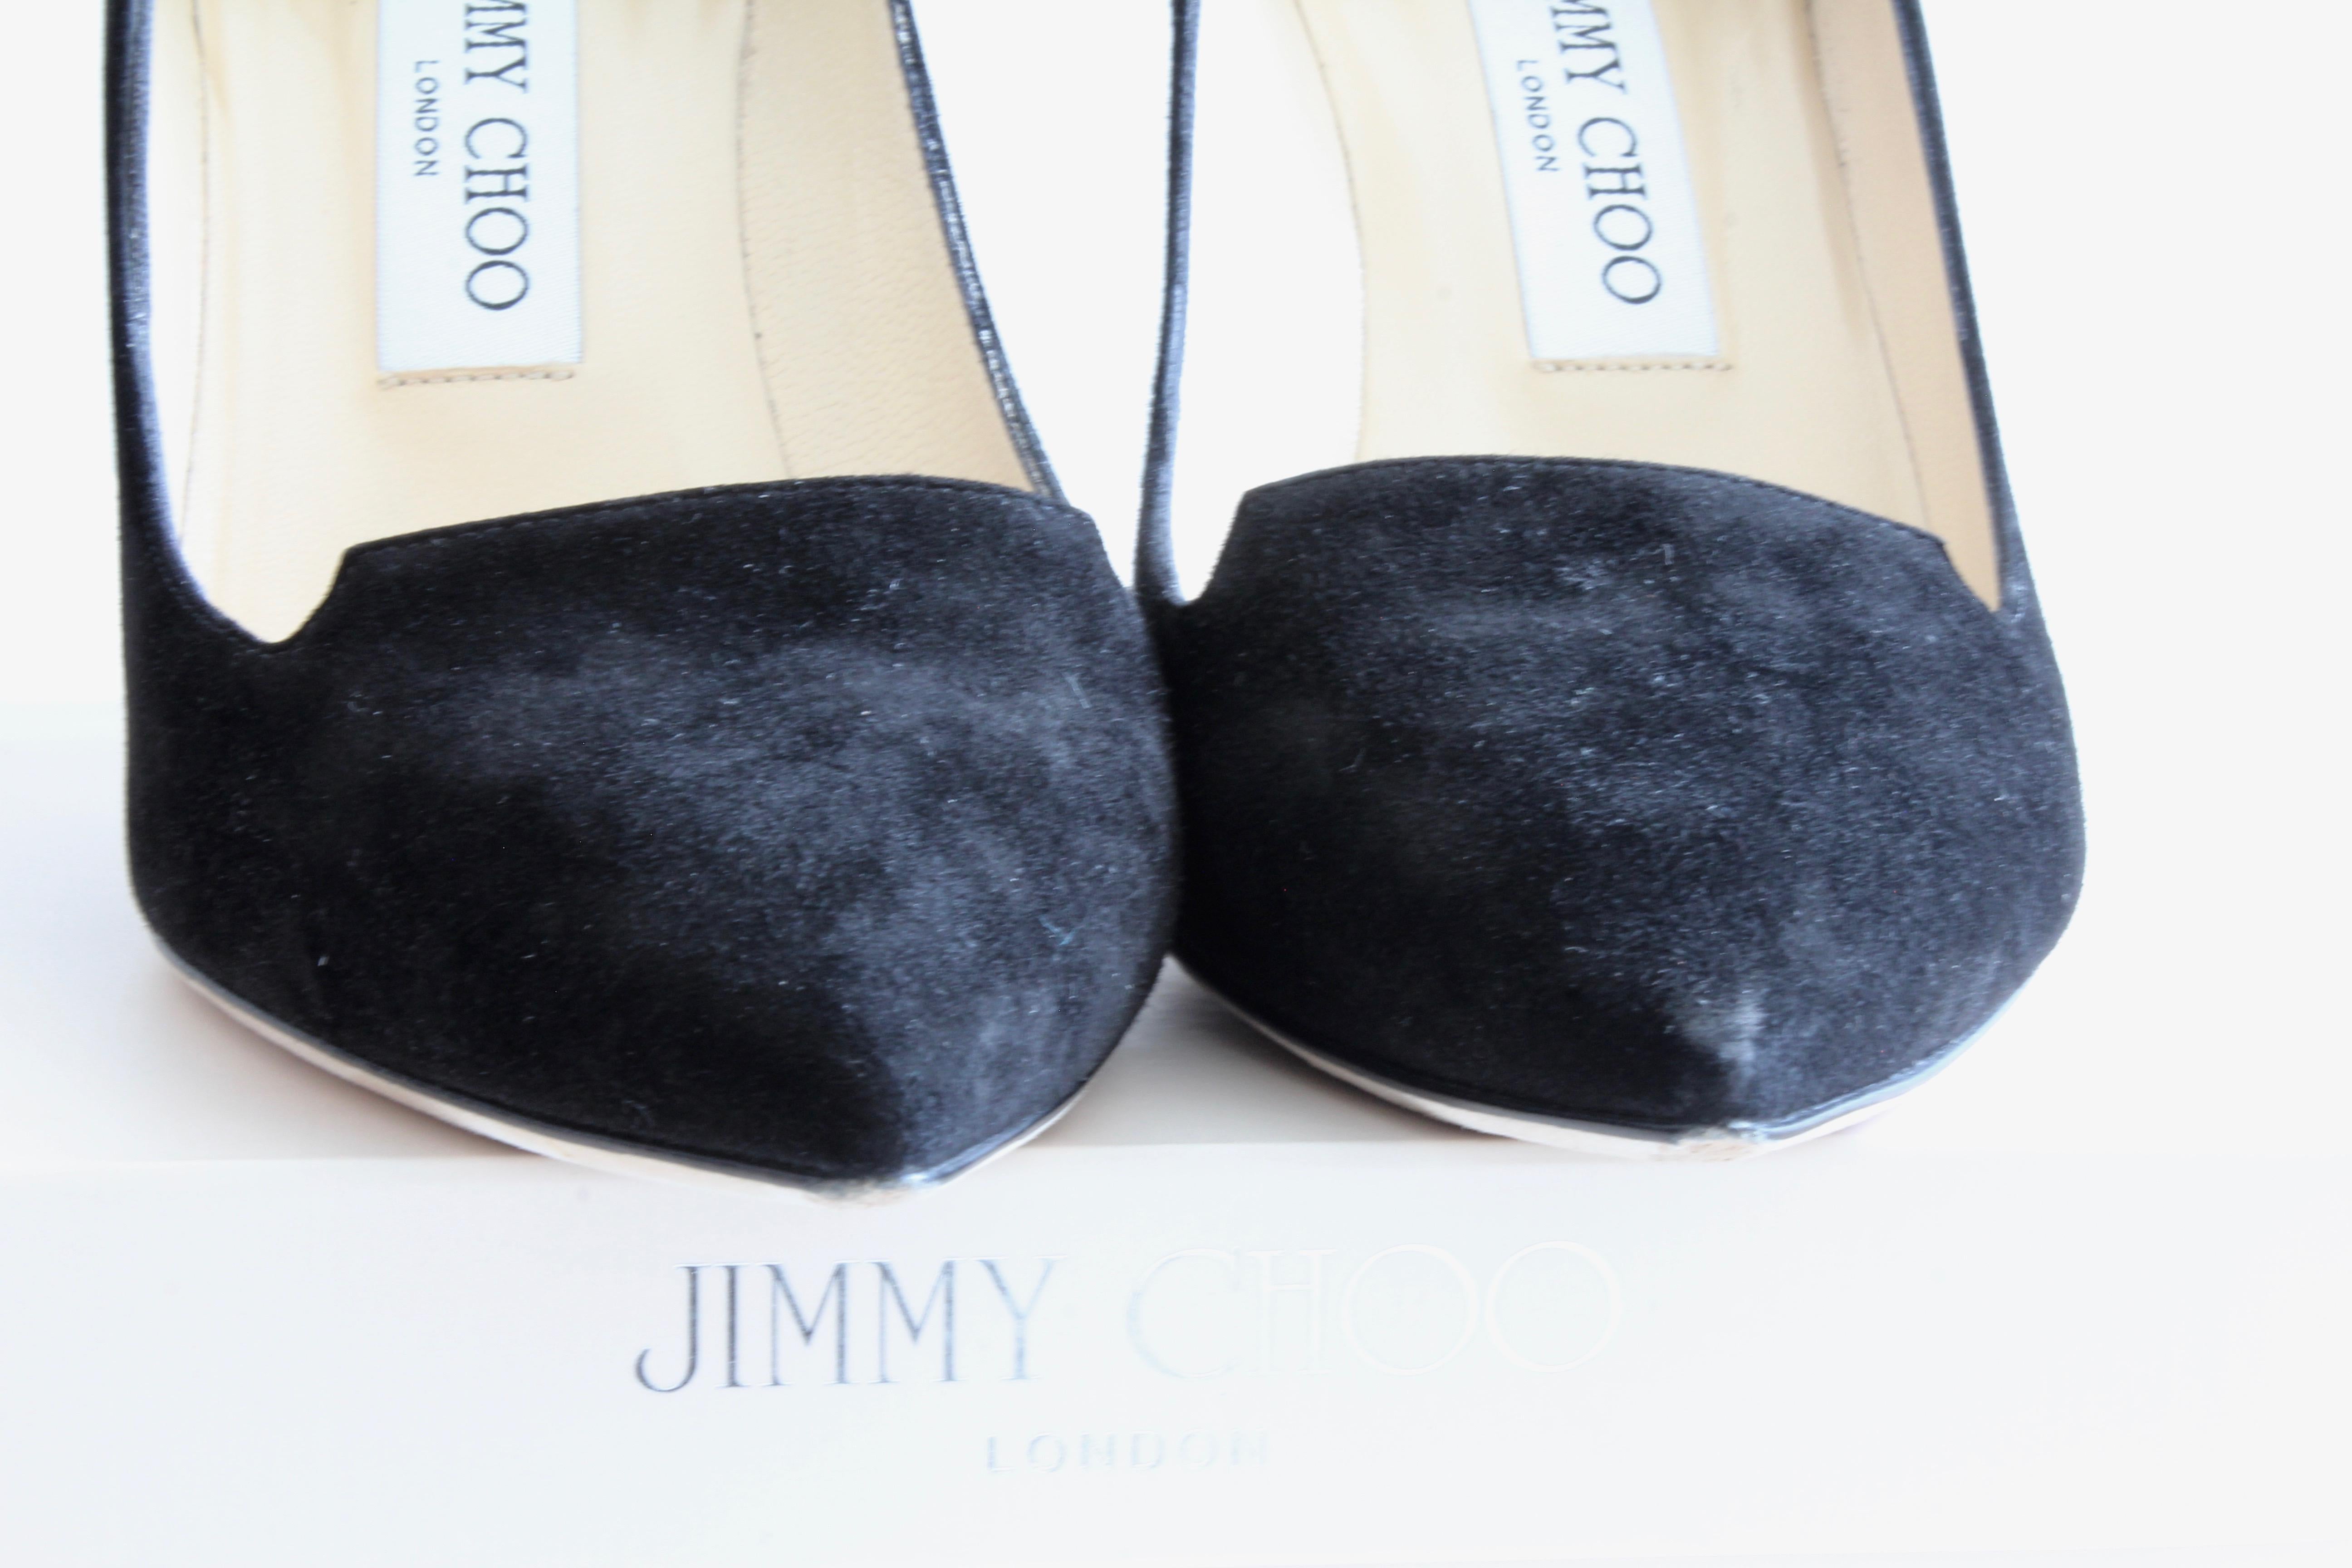 Jimmy Choo Heels Black Stiletto Pumps 247 Alia Suede Leather with Box For Sale 5